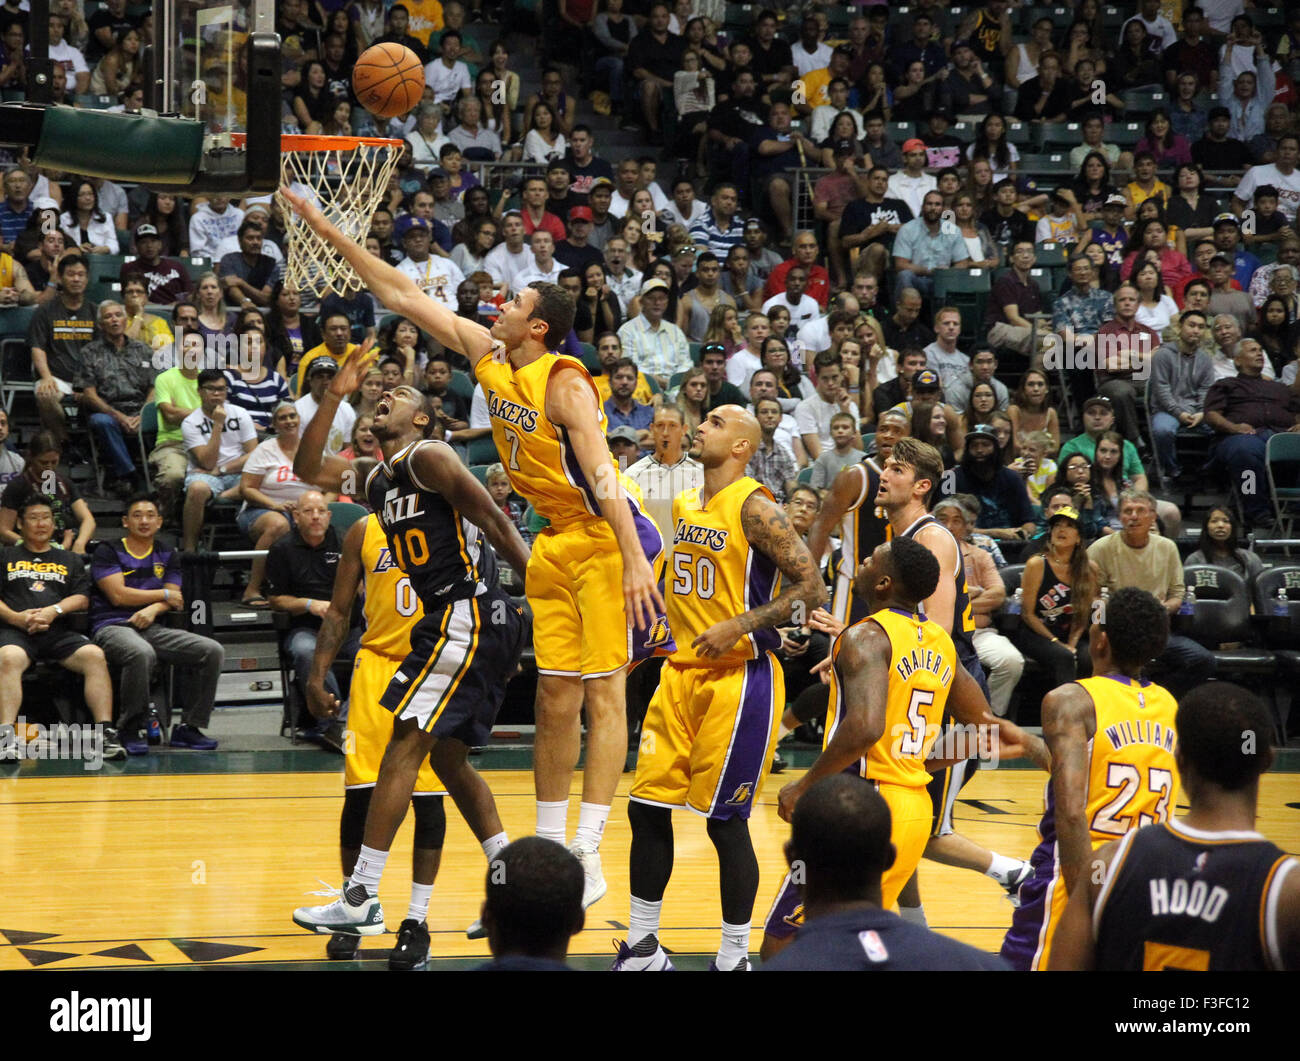 Hawaii, USA. 7th October, 2015. October 6, 2015 - Utah Jazz guard Alec Burks #10 slpits Los Angeles Lakers forward Larry Nance Jr. #7 and Los Angeles Lakers center Robert Sacre #50 for two points during preseason action between the Los Angeles Lakers and the Utah Jazz at the Stan Sheriff Center on the campus of the University of Hawaii at Manoa in Honolulu, HI. - Michael Sullivan/CSM Credit:  Cal Sport Media/Alamy Live News Stock Photo